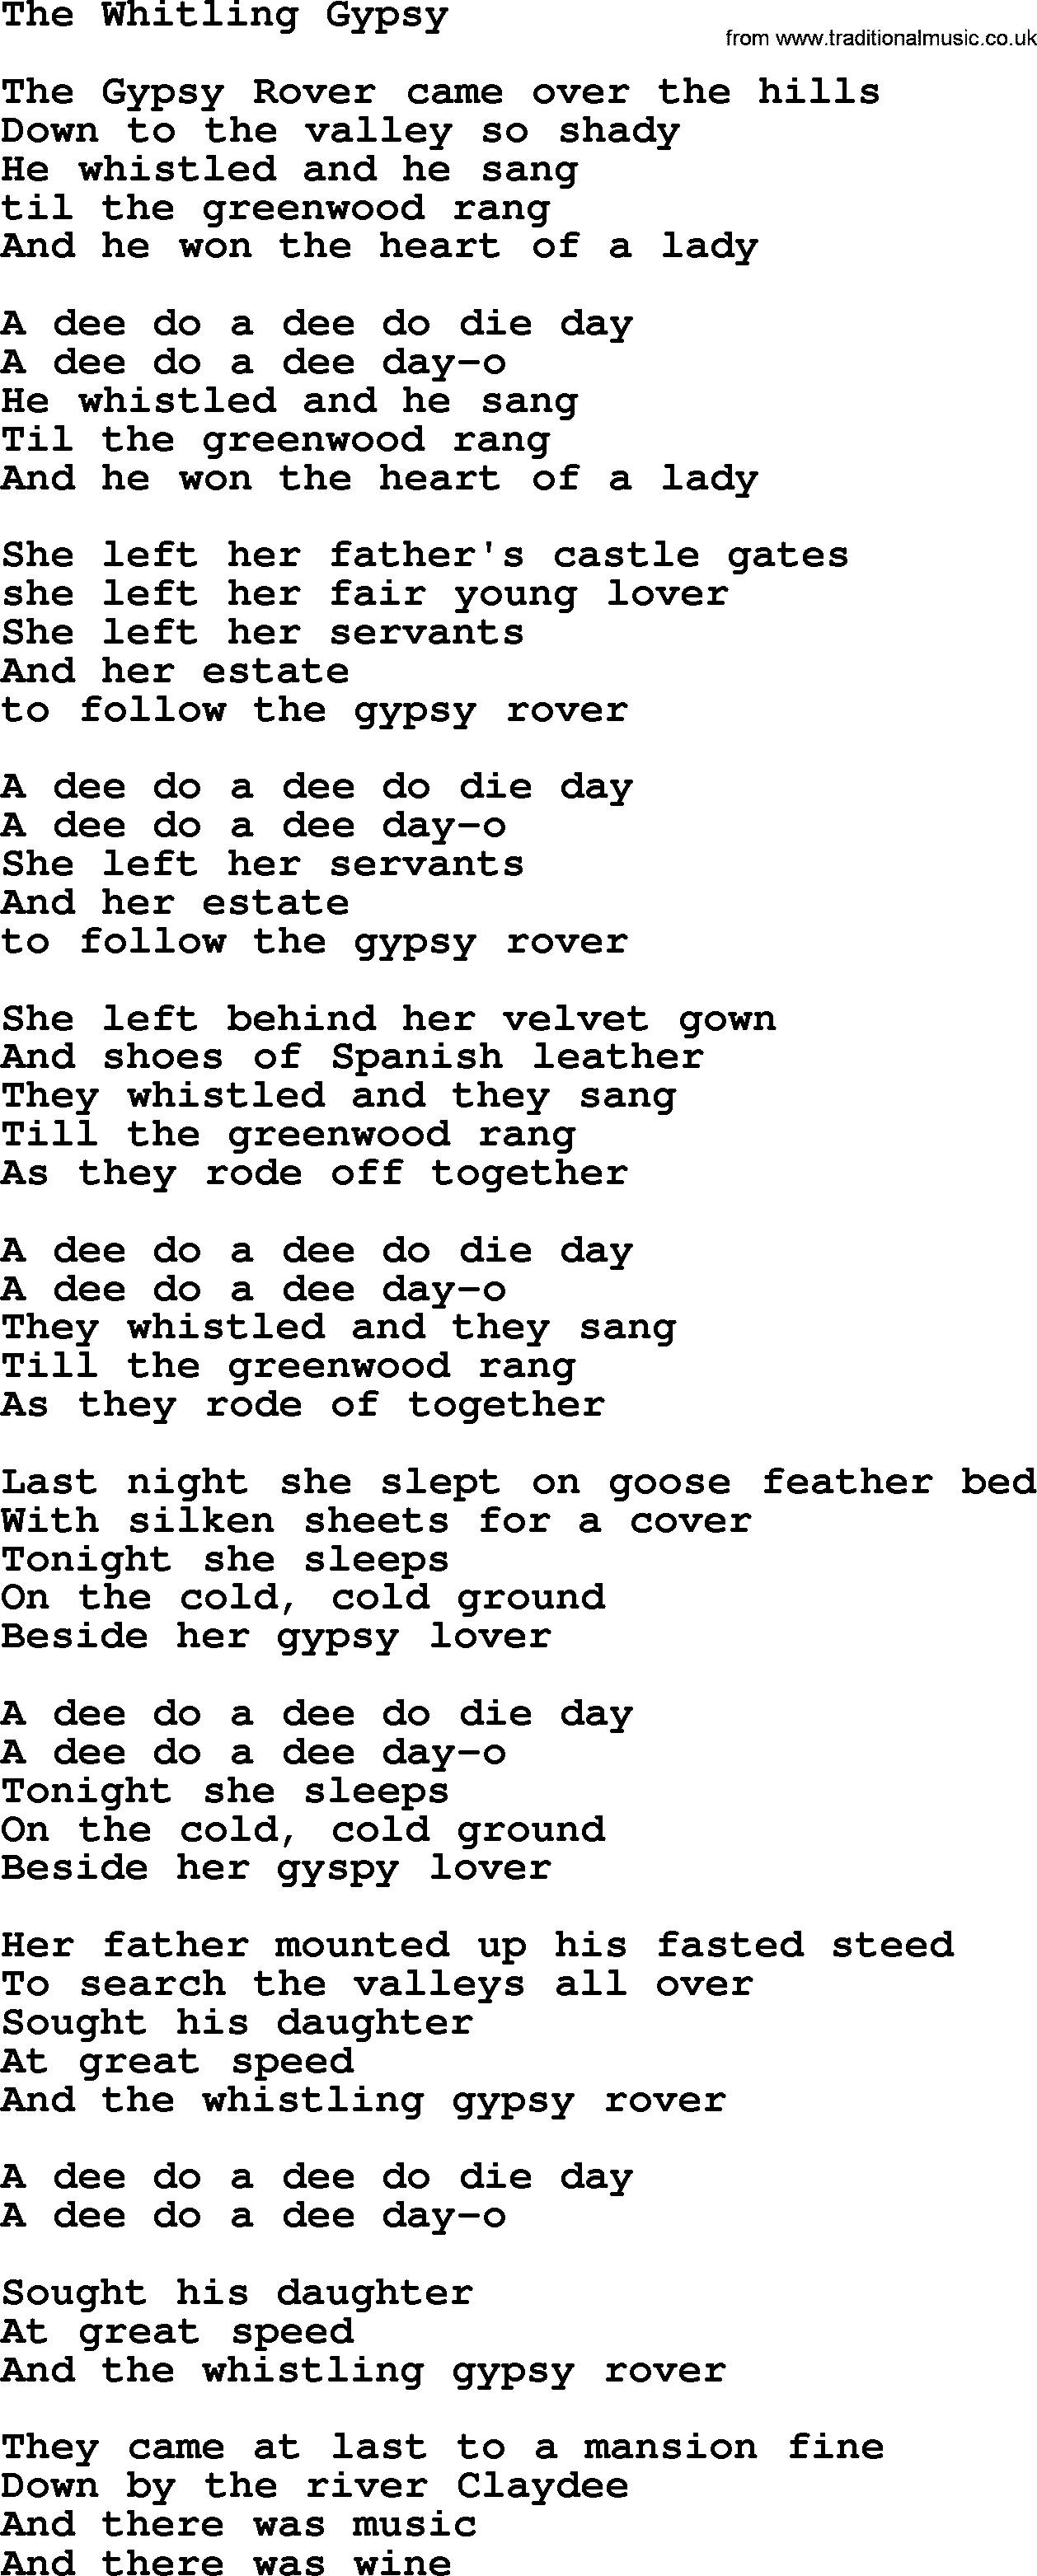 The Byrds song The Whitling Gypsy, lyrics